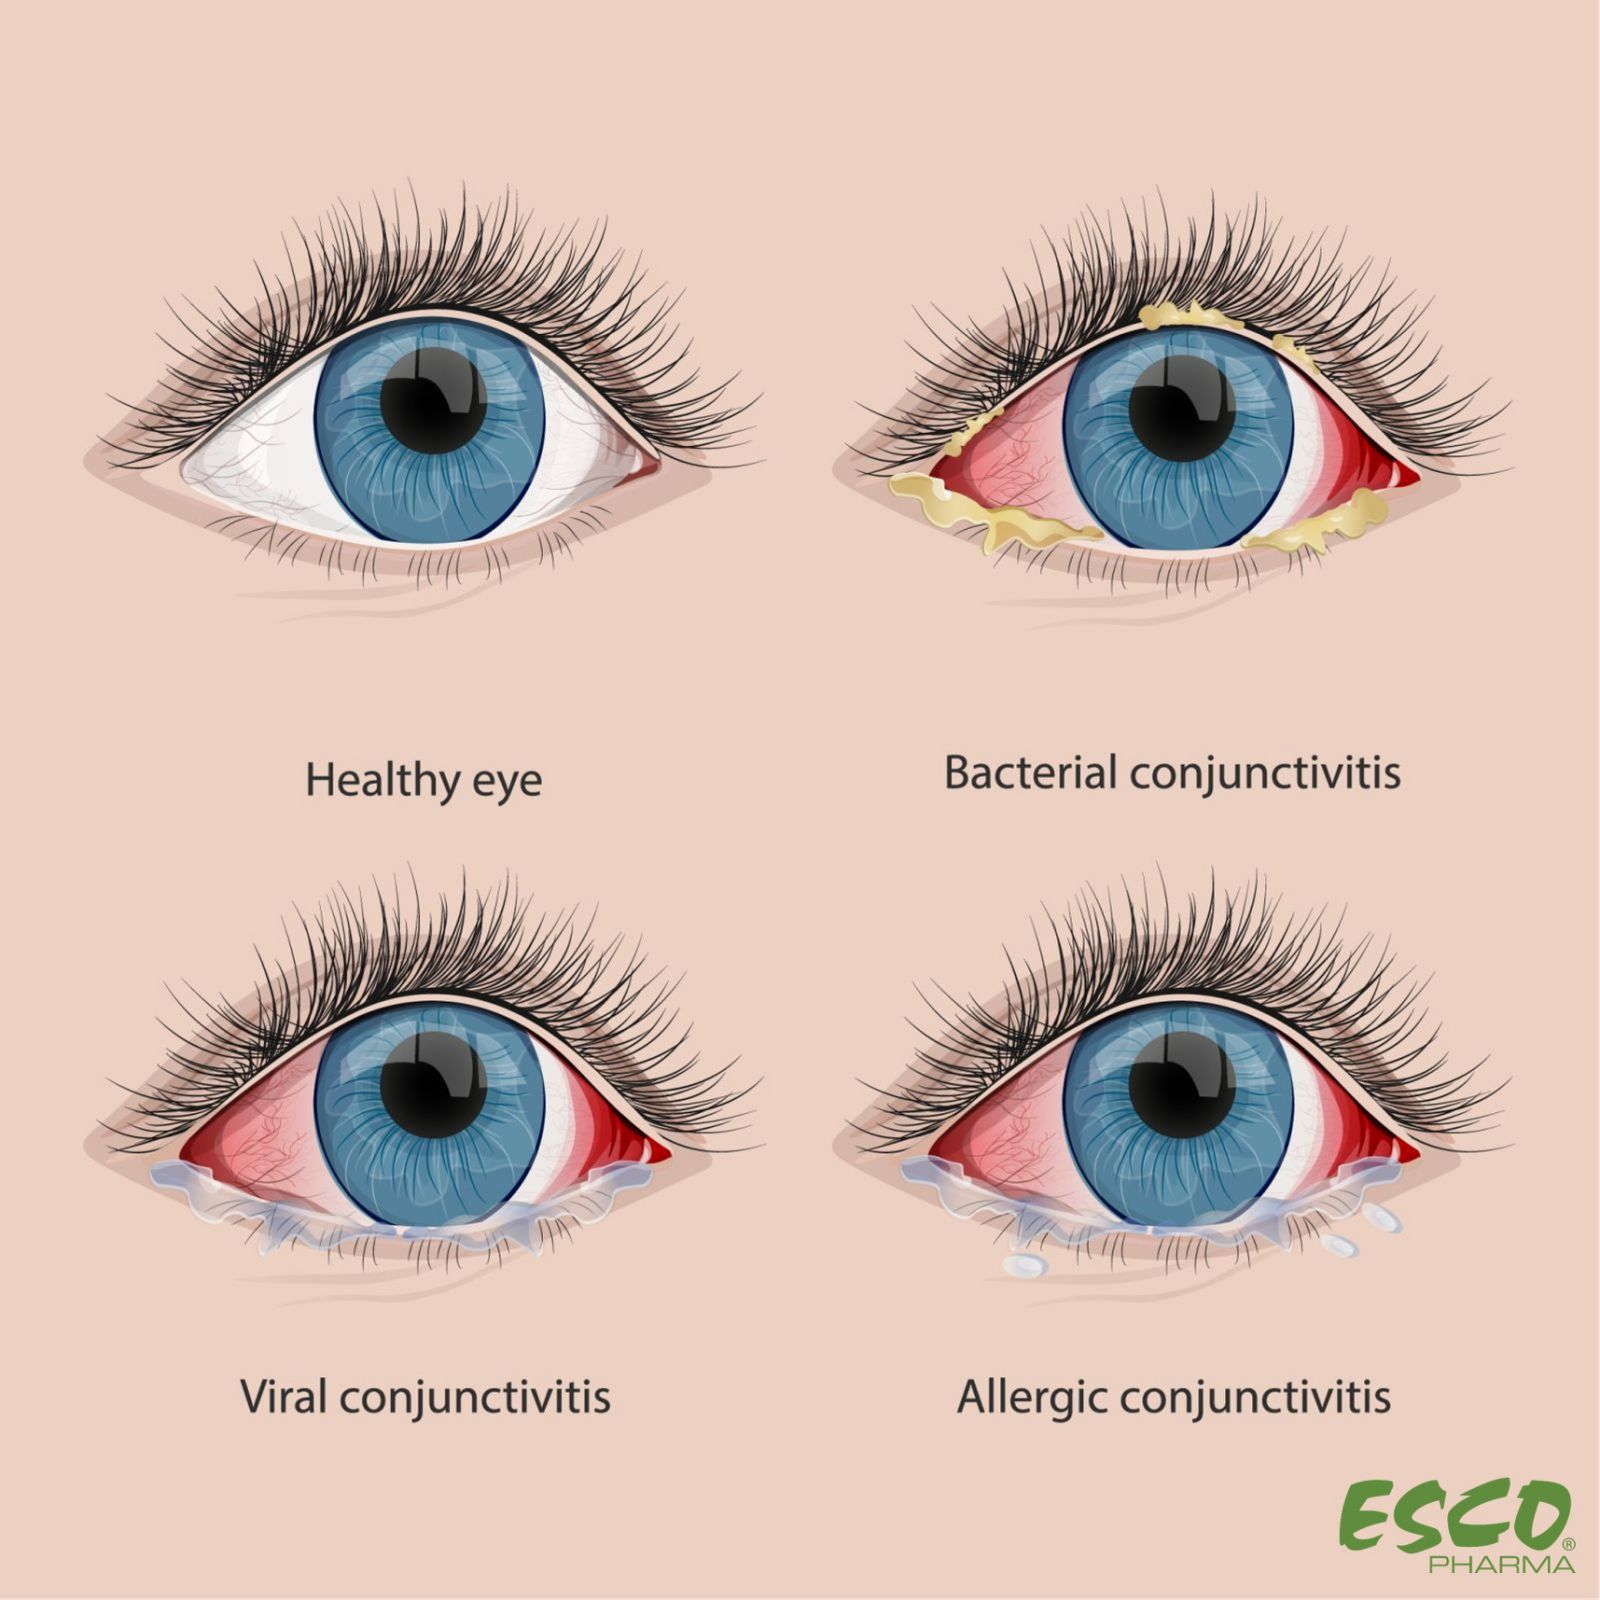 Fig. 1 Comparison of Healthy Eyes and Conjunctivitis